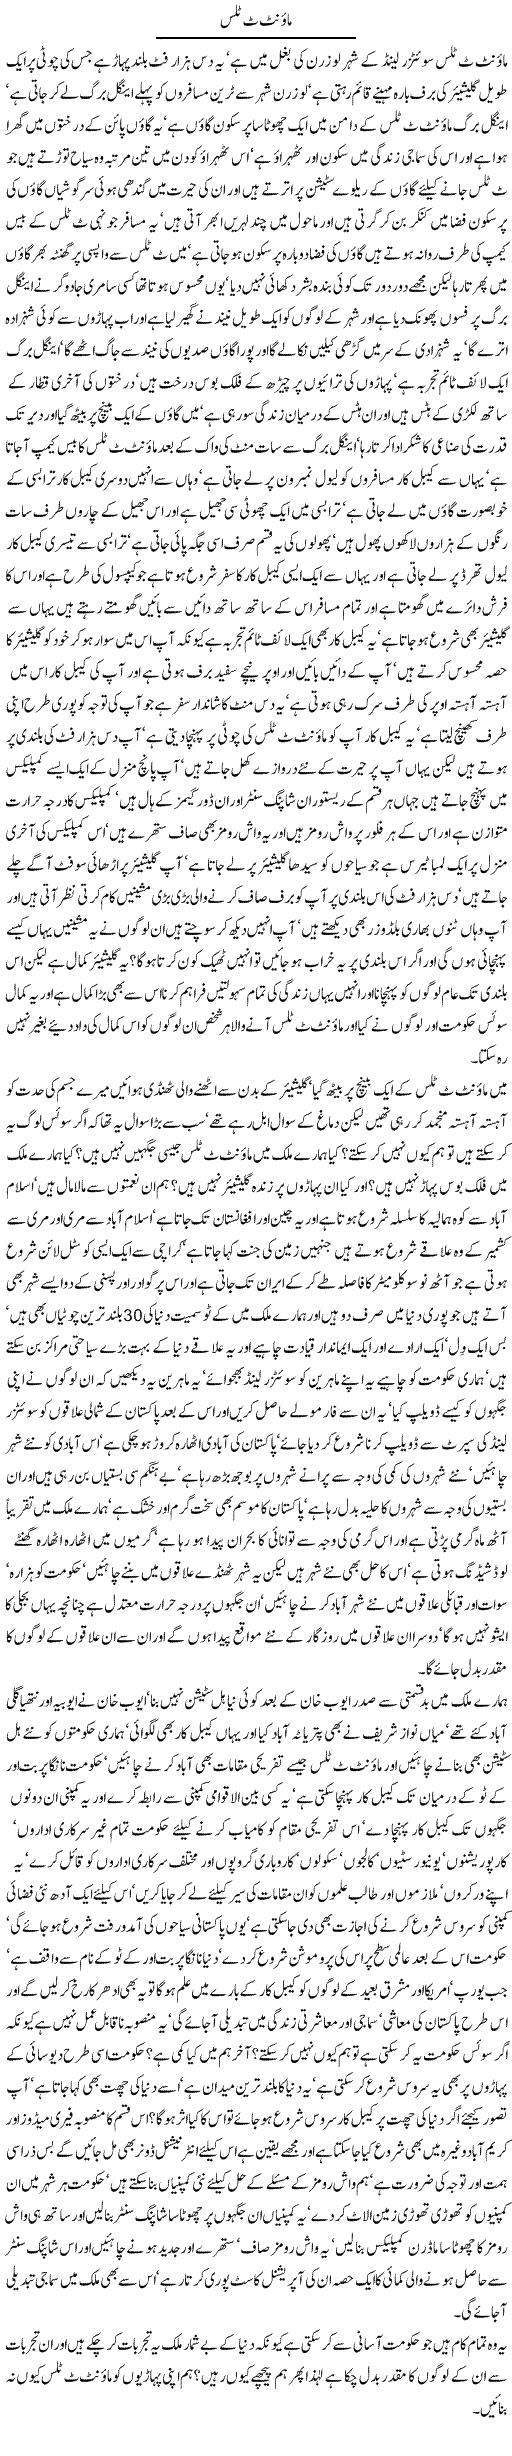 In Switzerland Express Column Javed Chaudhry 15 July 2011